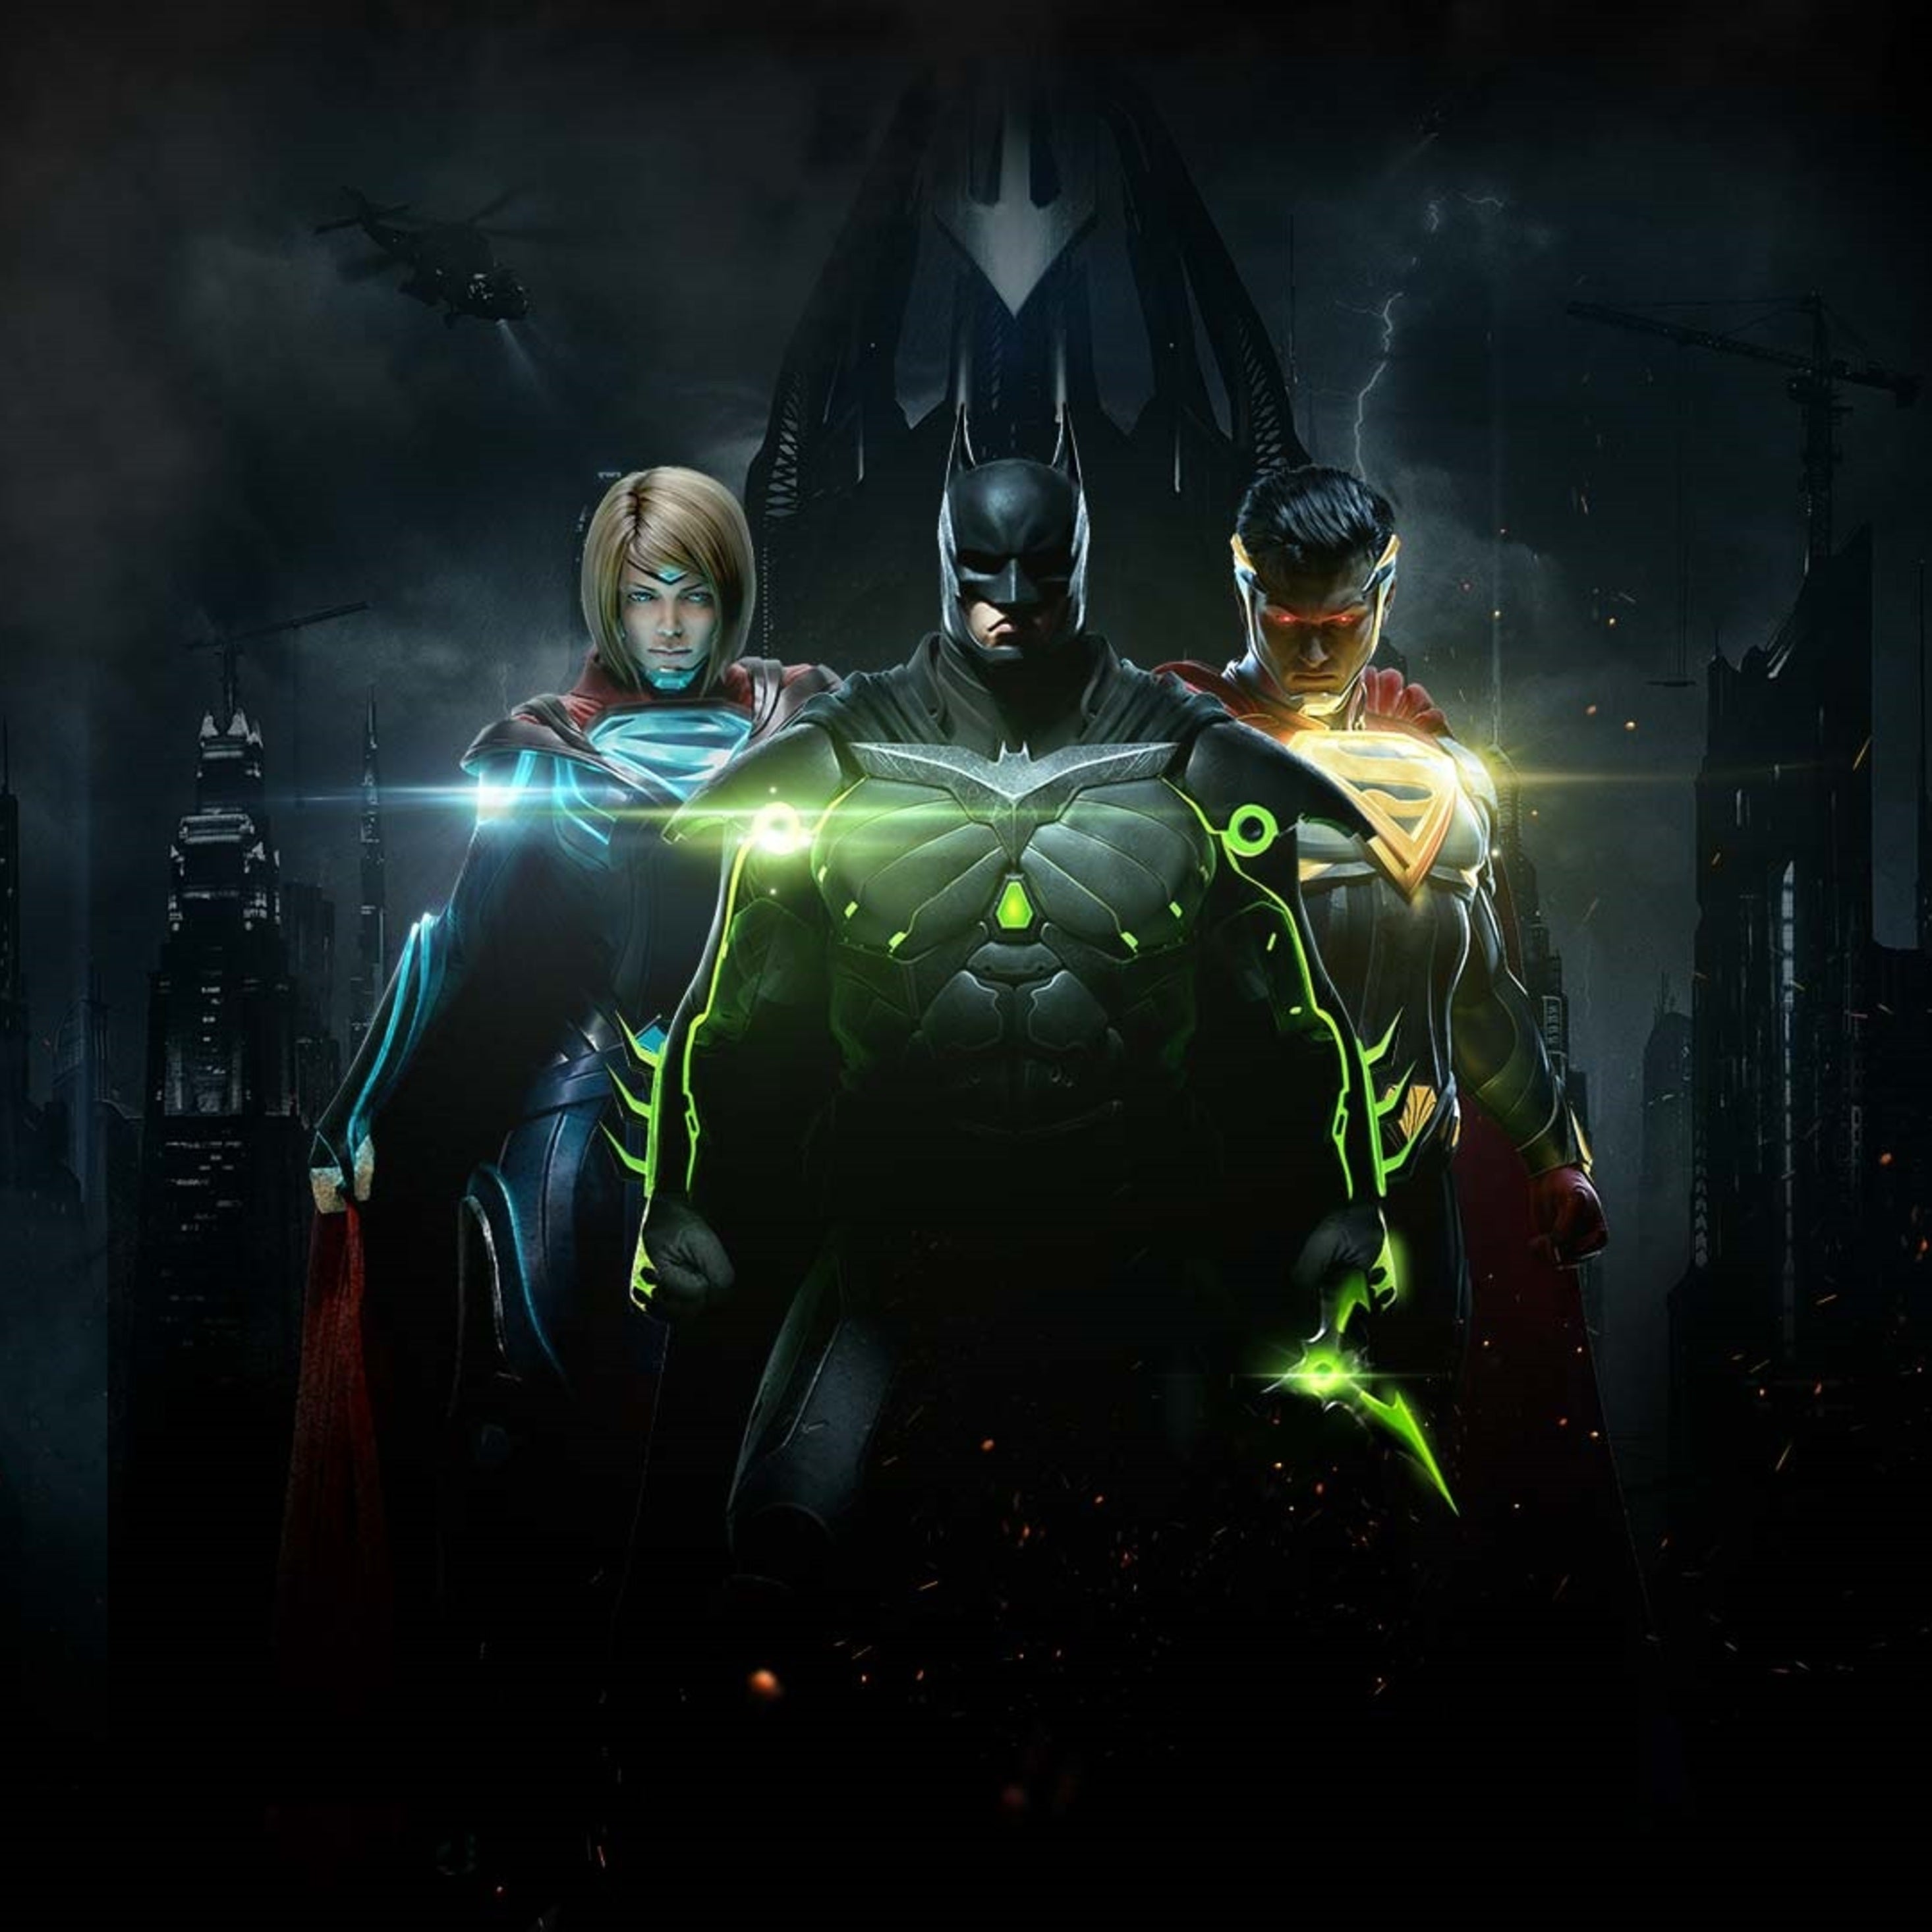 Image for 4K HDR! Injustice 2 Xbox One X vs PS4 Pro